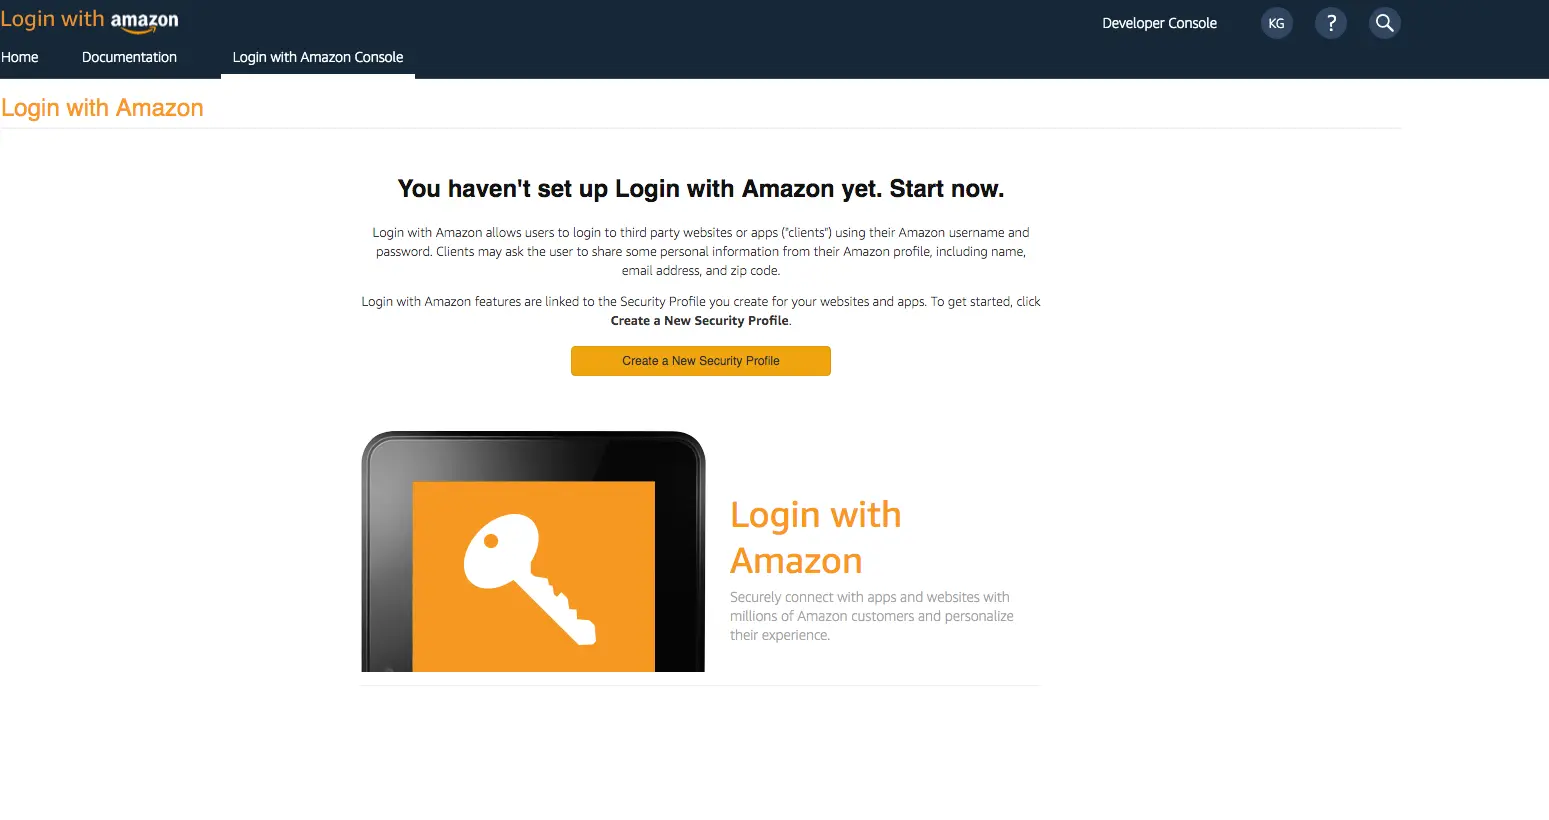 The login with Amazon console with a create a new security profile button displayed.